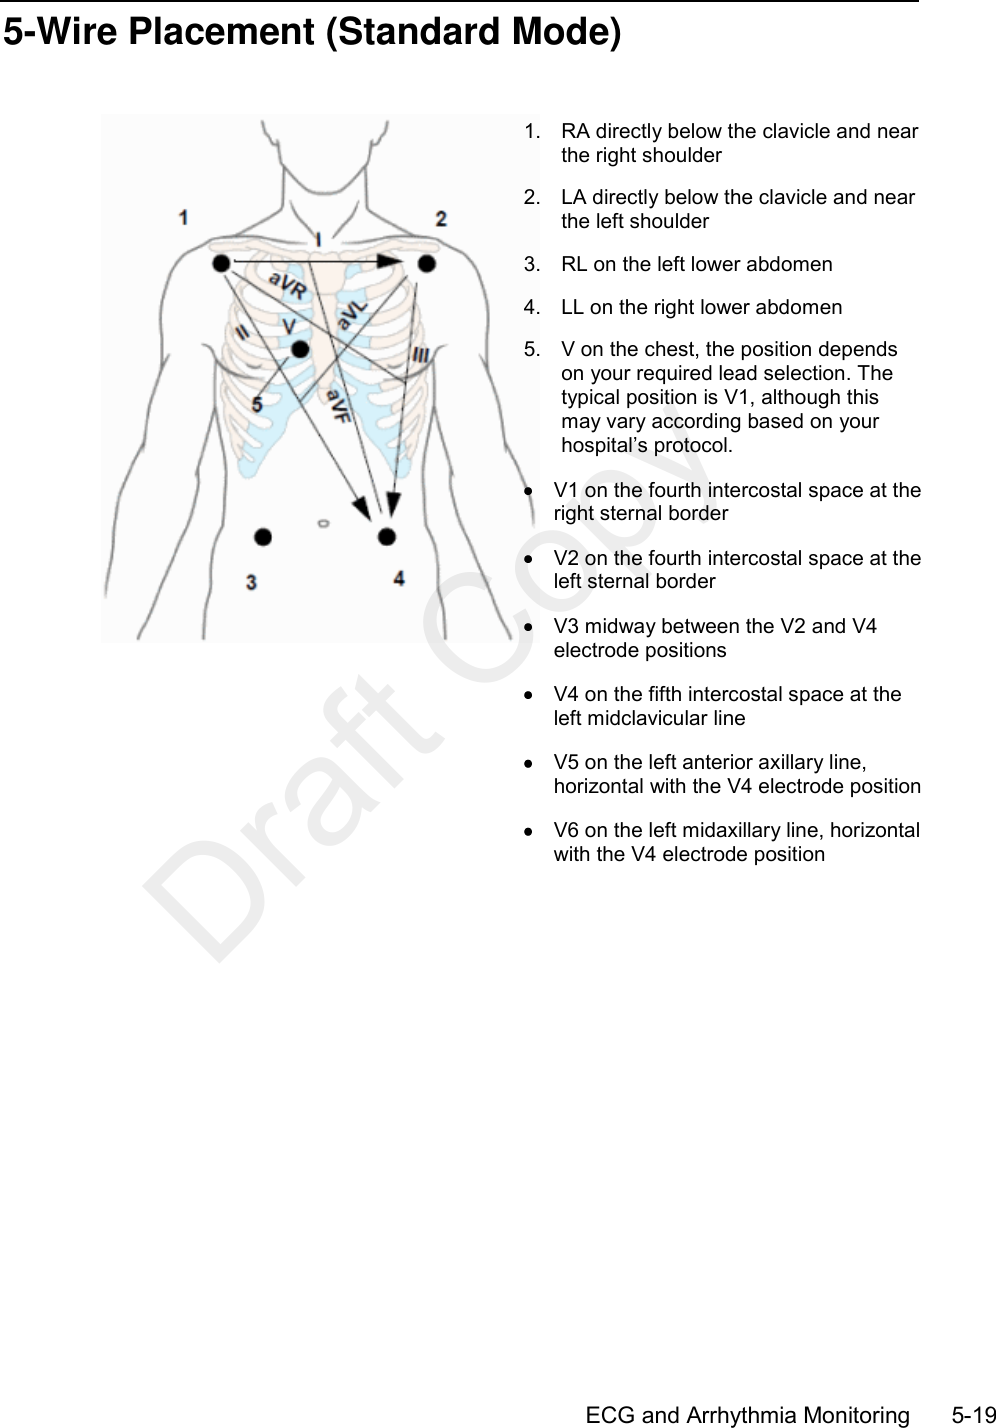      ECG and Arrhythmia Monitoring        5-19 5-Wire Placement (Standard Mode)   1.  RA directly below the clavicle and near the right shoulder 2.  LA directly below the clavicle and near the left shoulder 3.  RL on the left lower abdomen 4.  LL on the right lower abdomen 5.  V on the chest, the position depends on your required lead selection. The typical position is V1, although this may vary according based on your hospital’s protocol.   V1 on the fourth intercostal space at the right sternal border   V2 on the fourth intercostal space at the left sternal border   V3 midway between the V2 and V4 electrode positions   V4 on the fifth intercostal space at the left midclavicular line   V5 on the left anterior axillary line, horizontal with the V4 electrode position   V6 on the left midaxillary line, horizontal with the V4 electrode position   Draft Copy